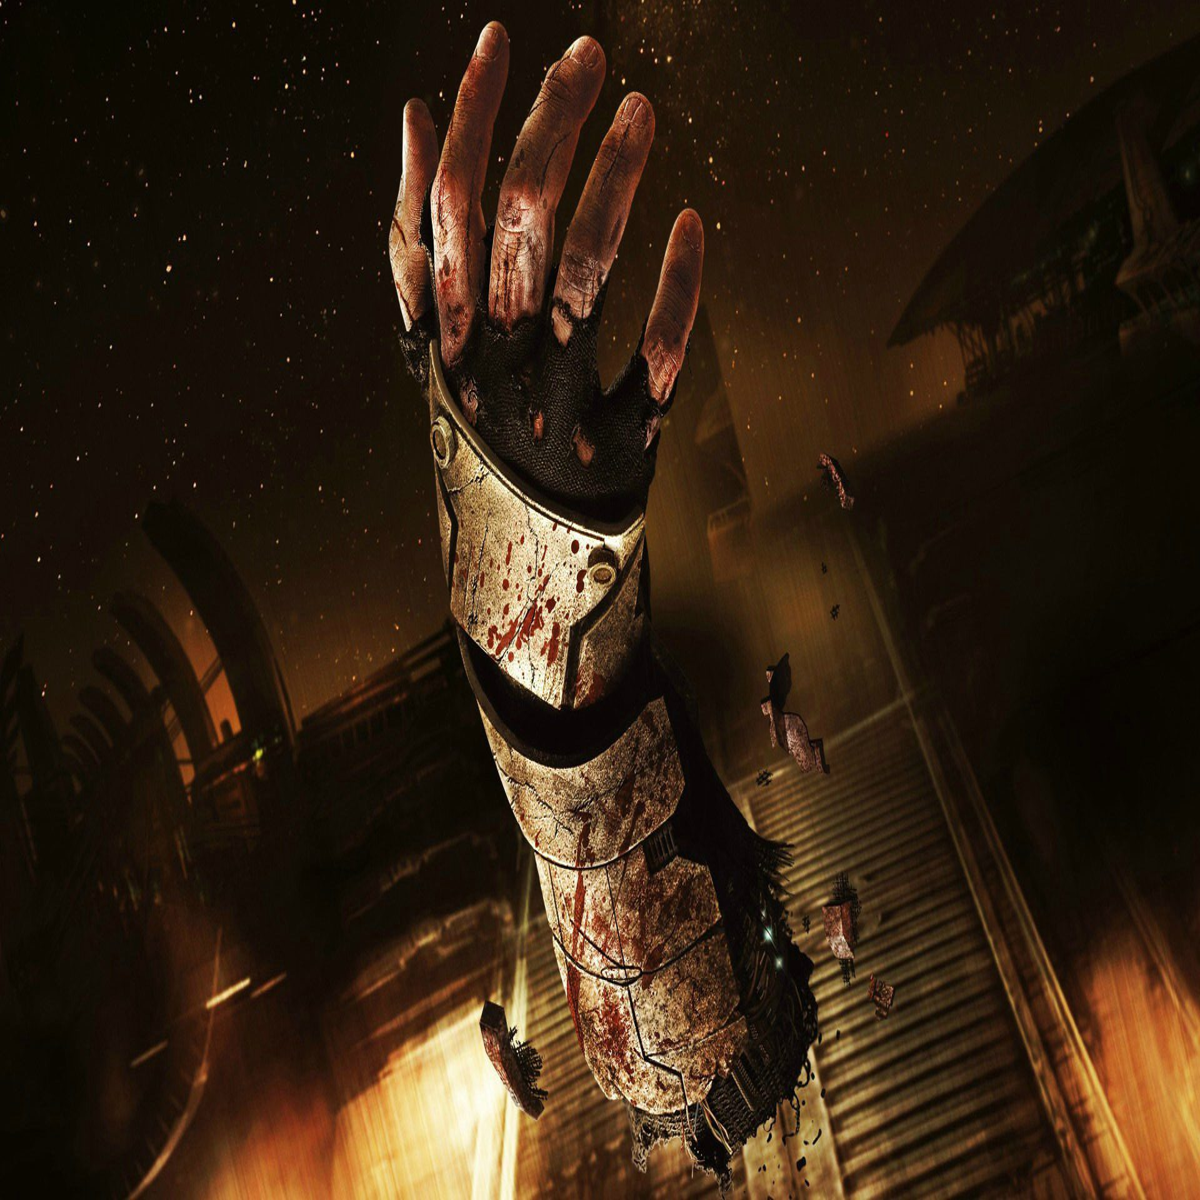 Dead Space remake pre-orders give you Dead Space 2 free on Steam